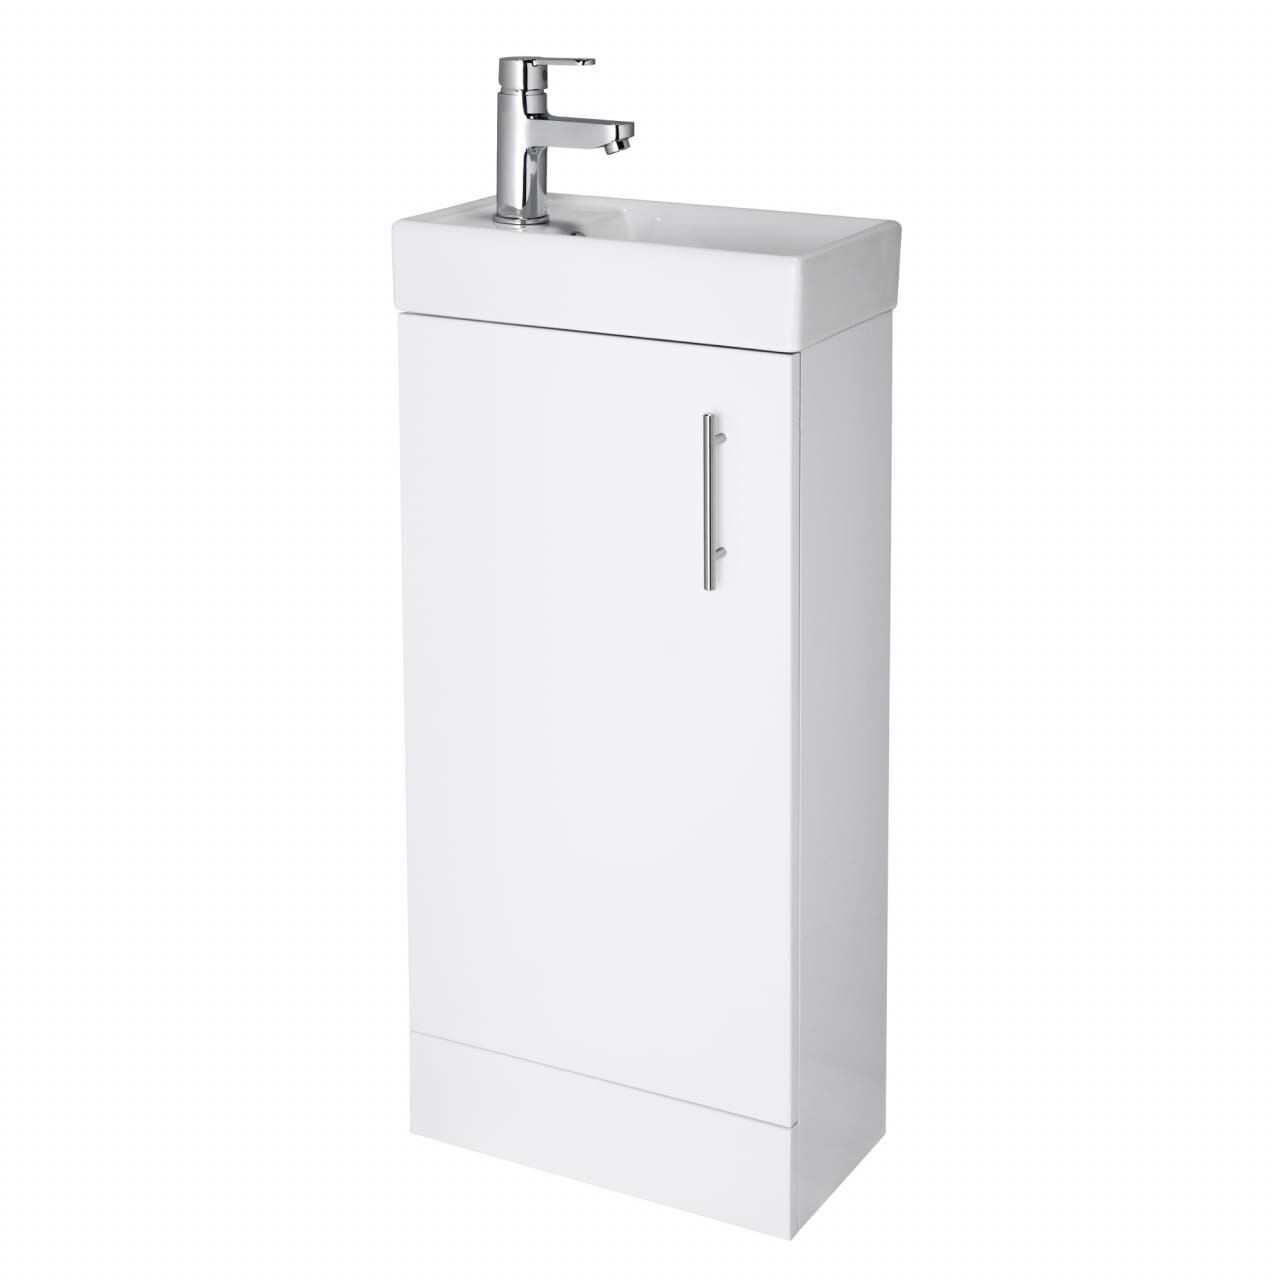 Essential Alaska 400mm floorstanding cloakroom unit with reversible basin and hinges EF122W TAP NOT INCLUDED